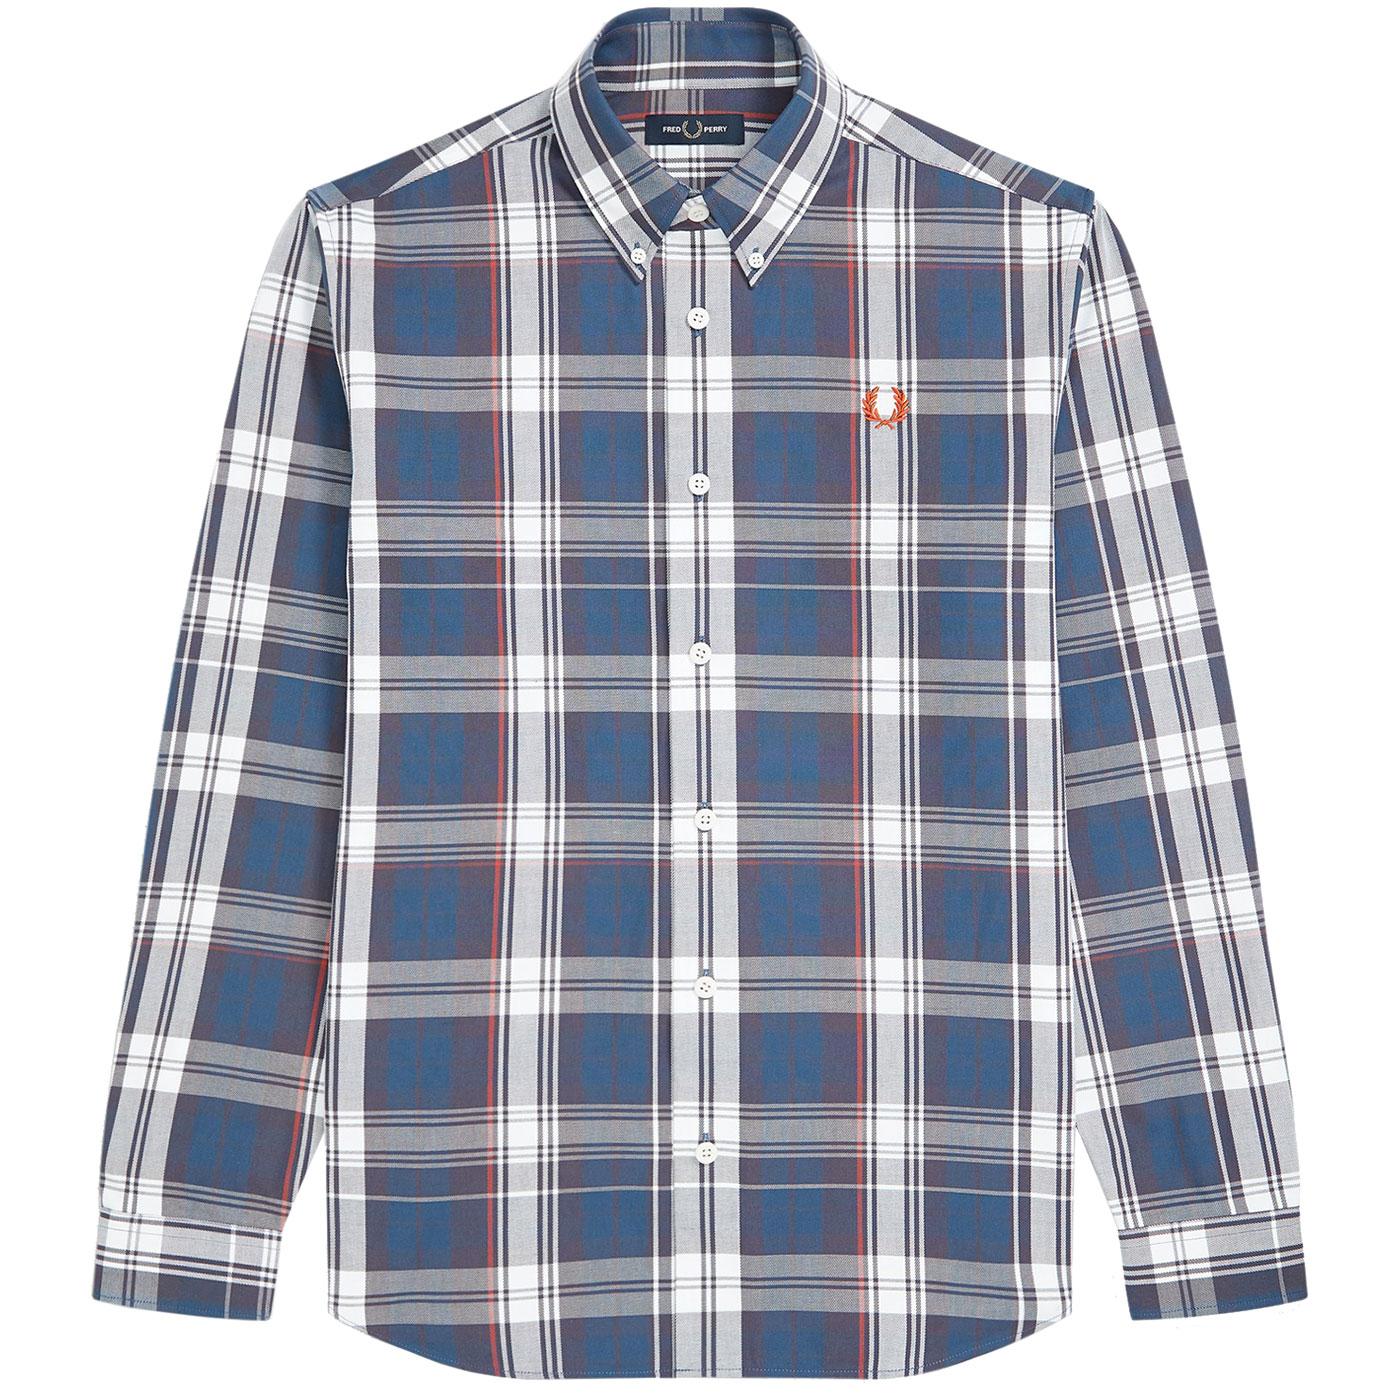 FRED PERRY Men's Retro Mod Twill Check Shirt MB